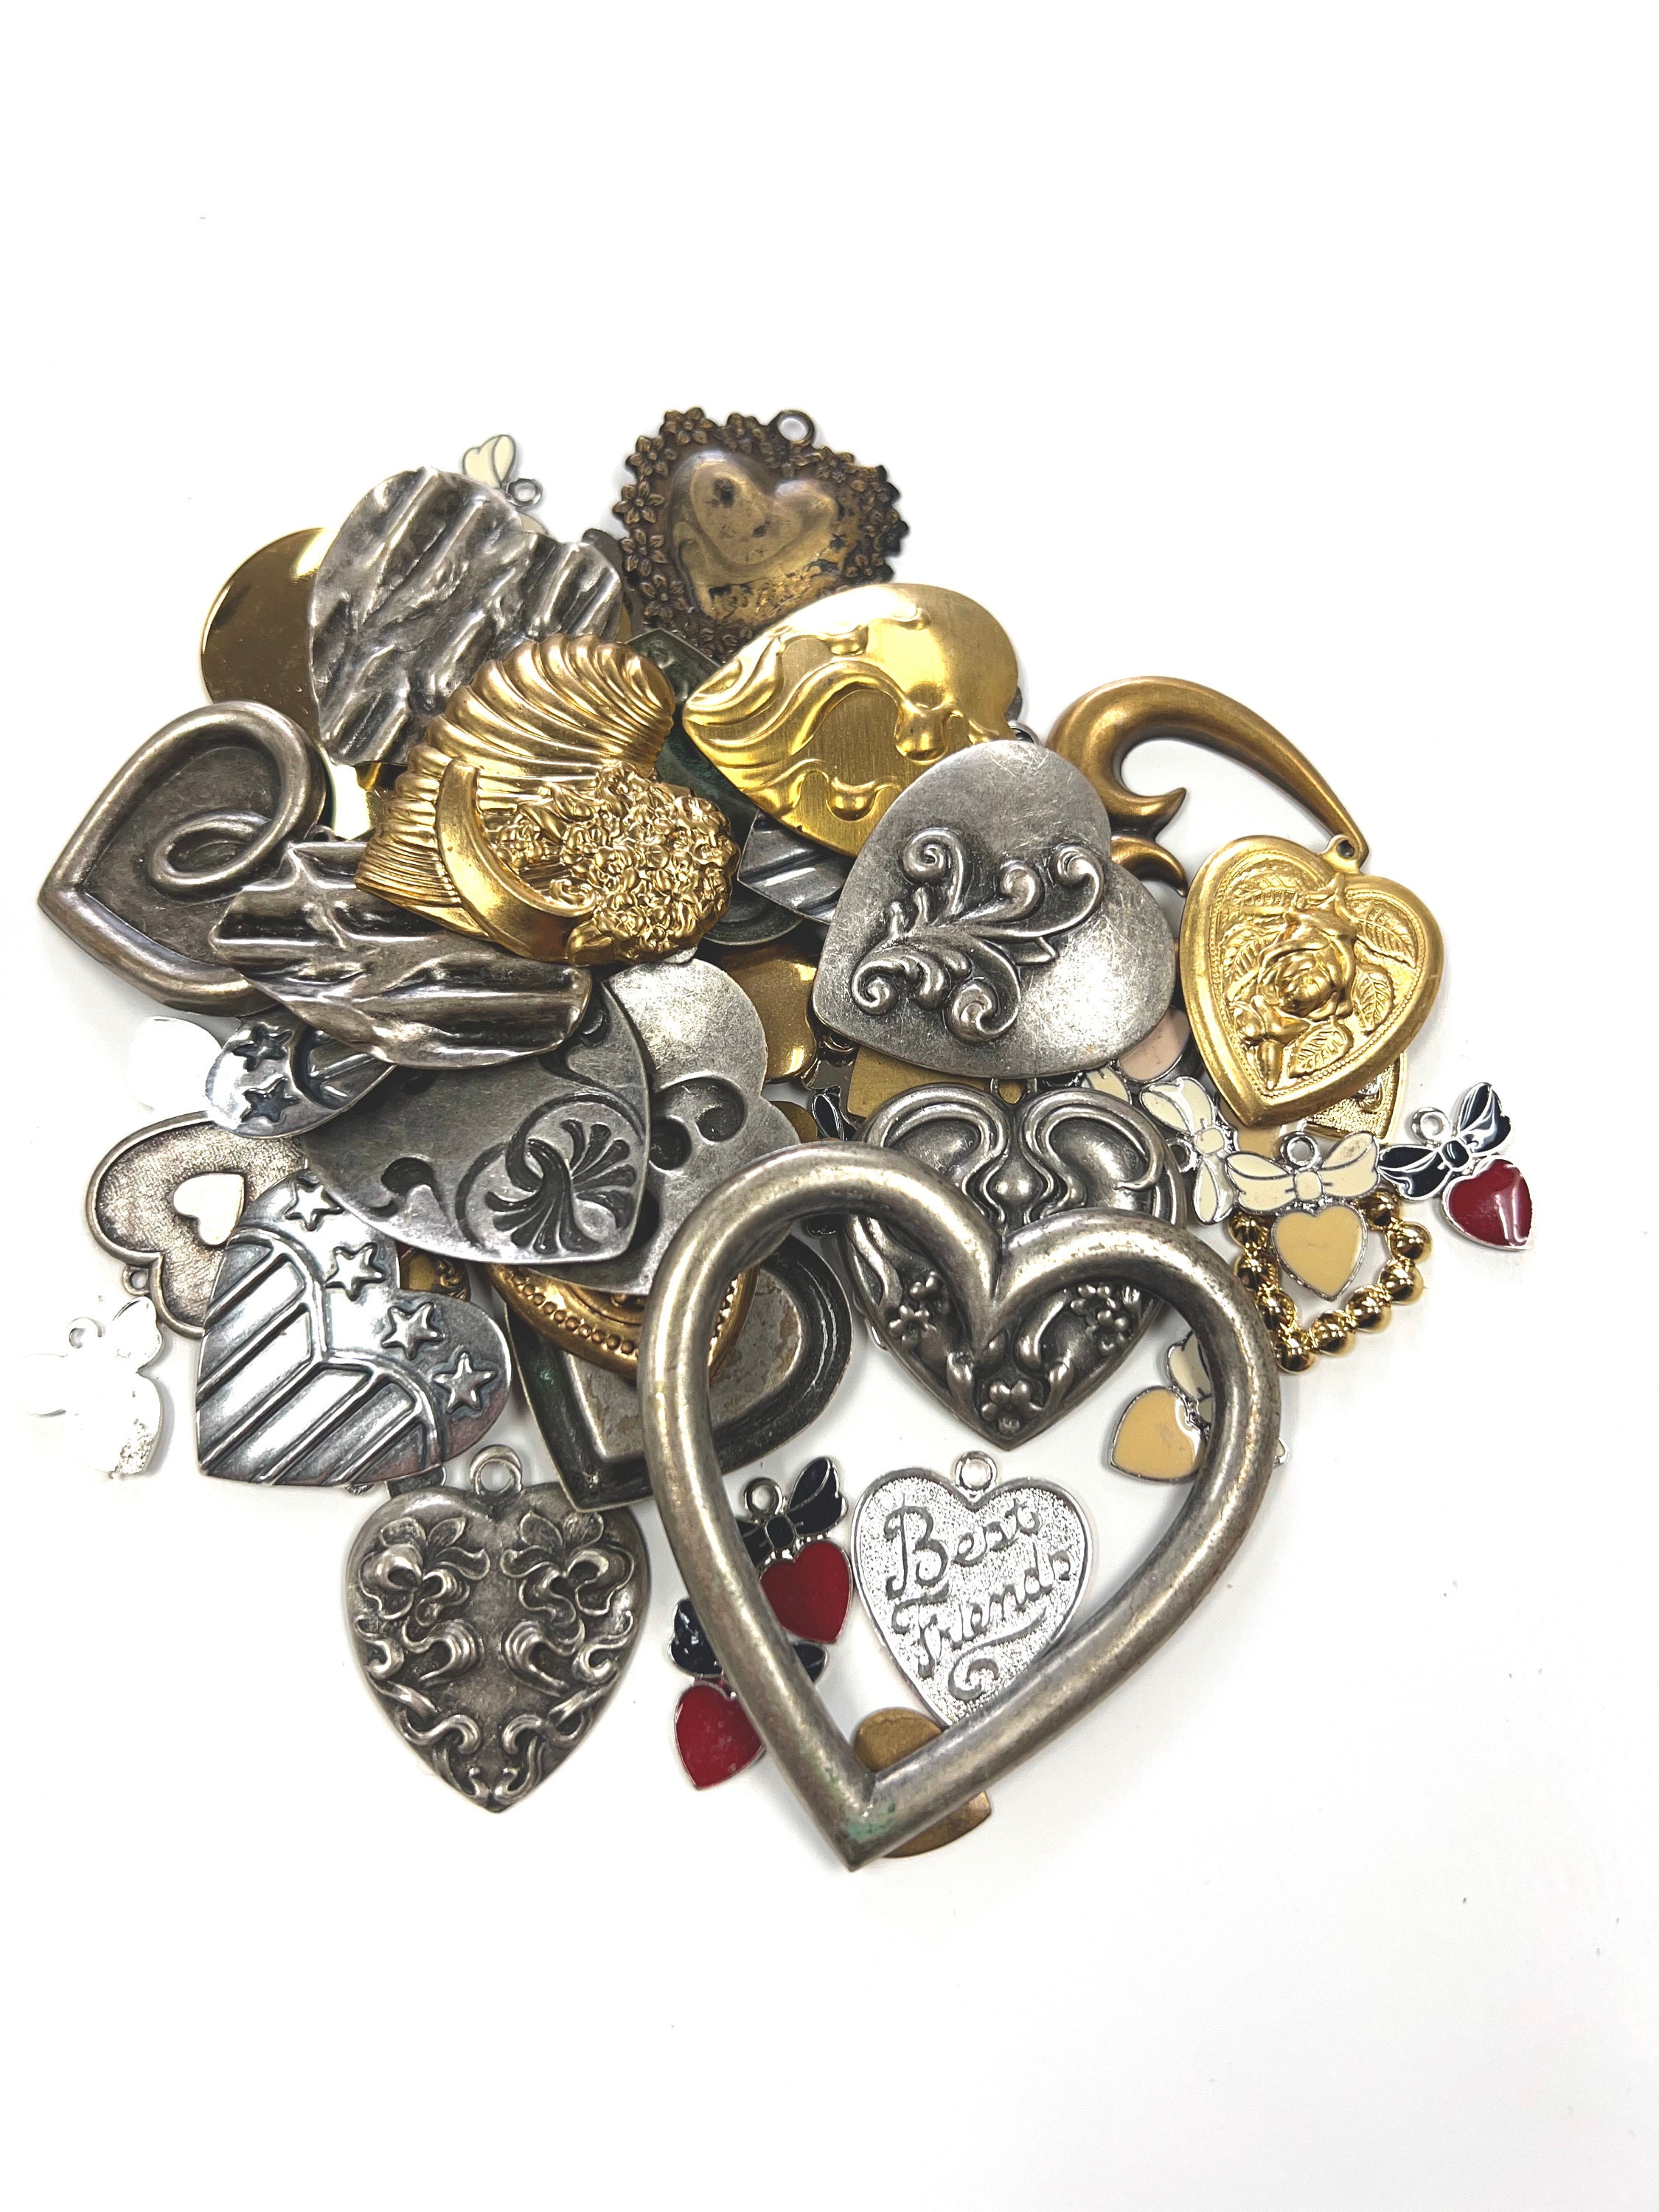 Vintage Charms Jewelry, Heart Charms Vintage